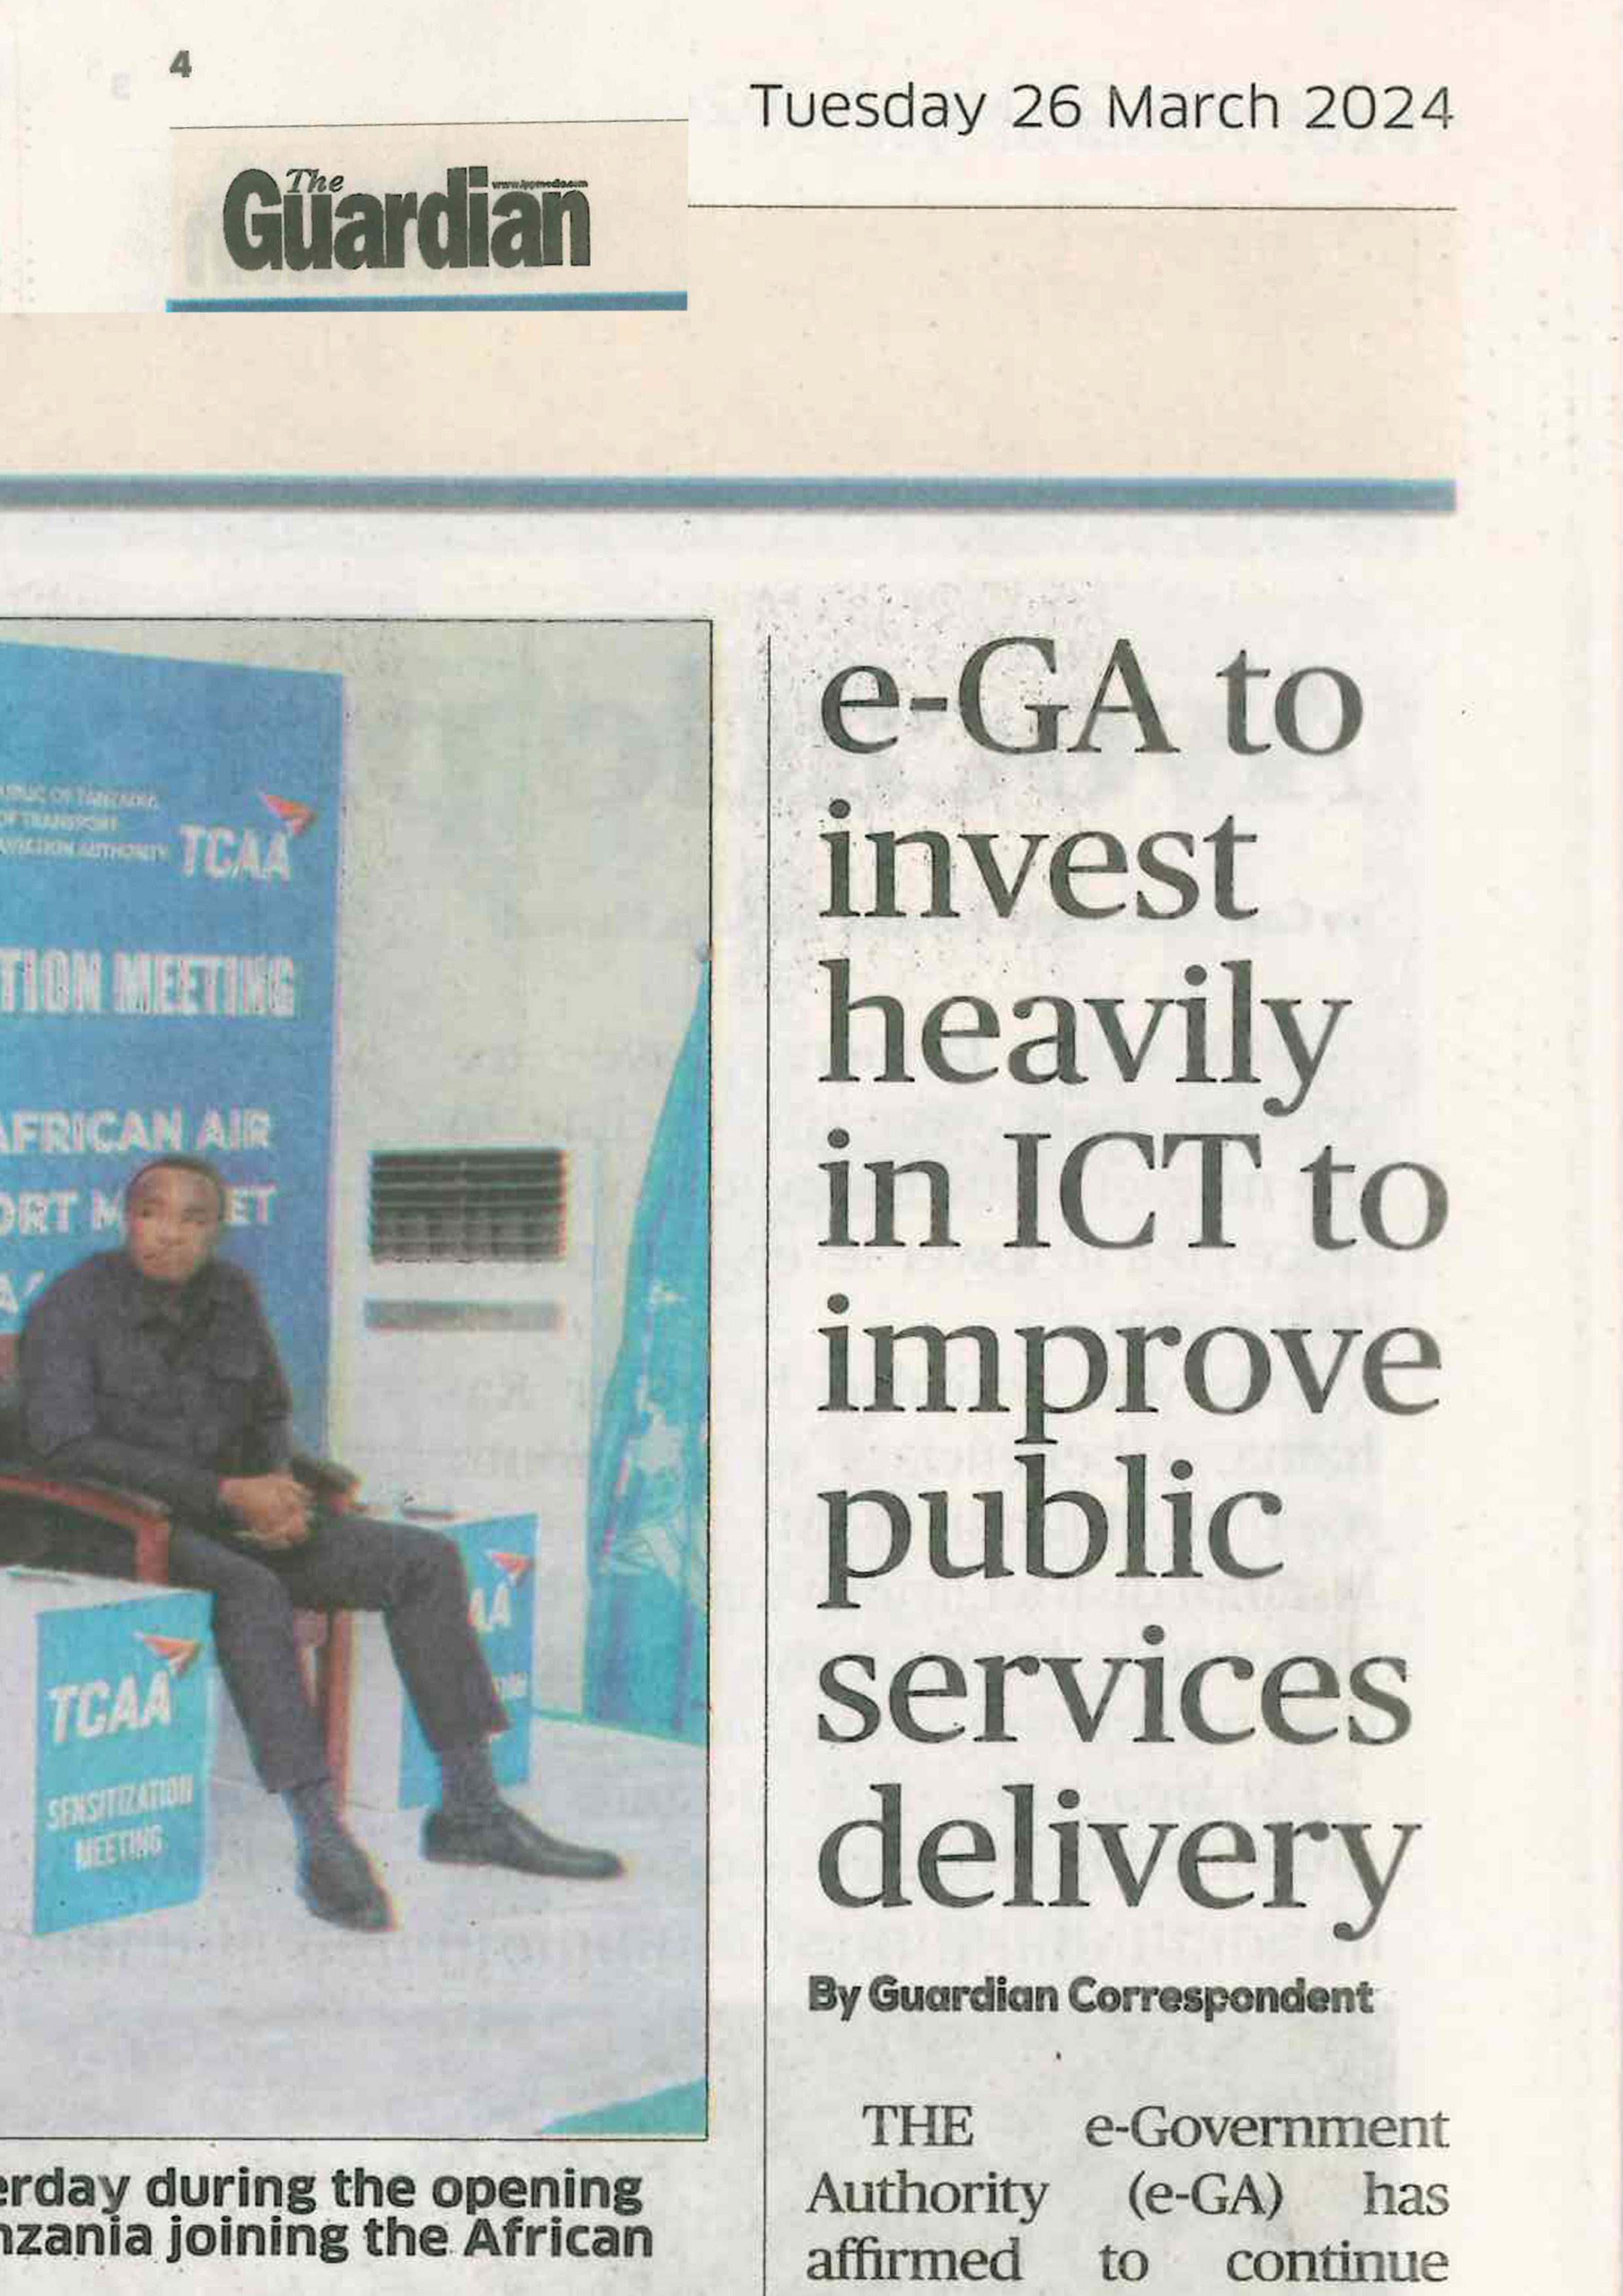 e-GA to invest heavily in ICT to improve public services delivery